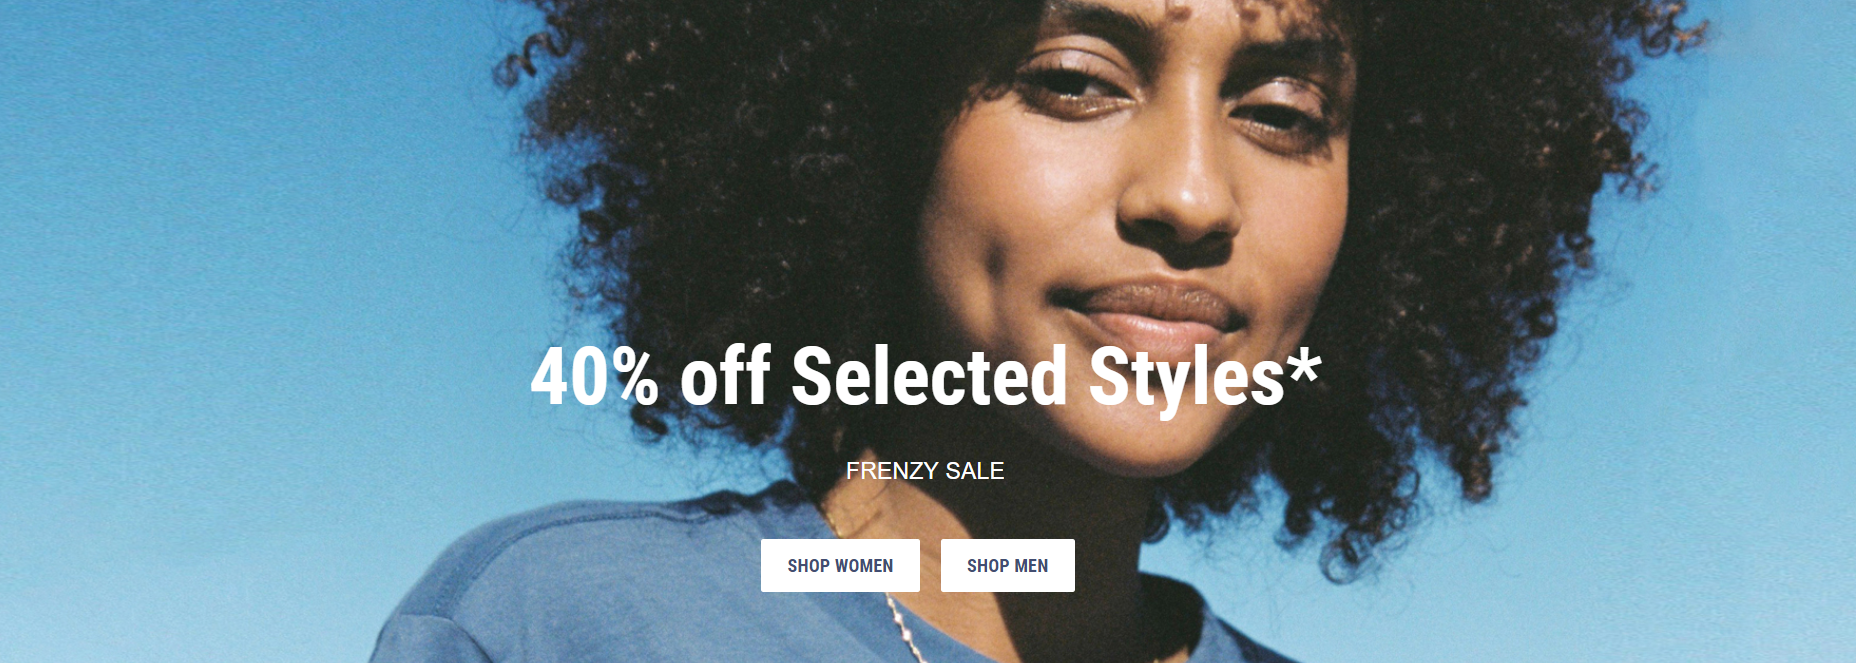 40% off Selected styles